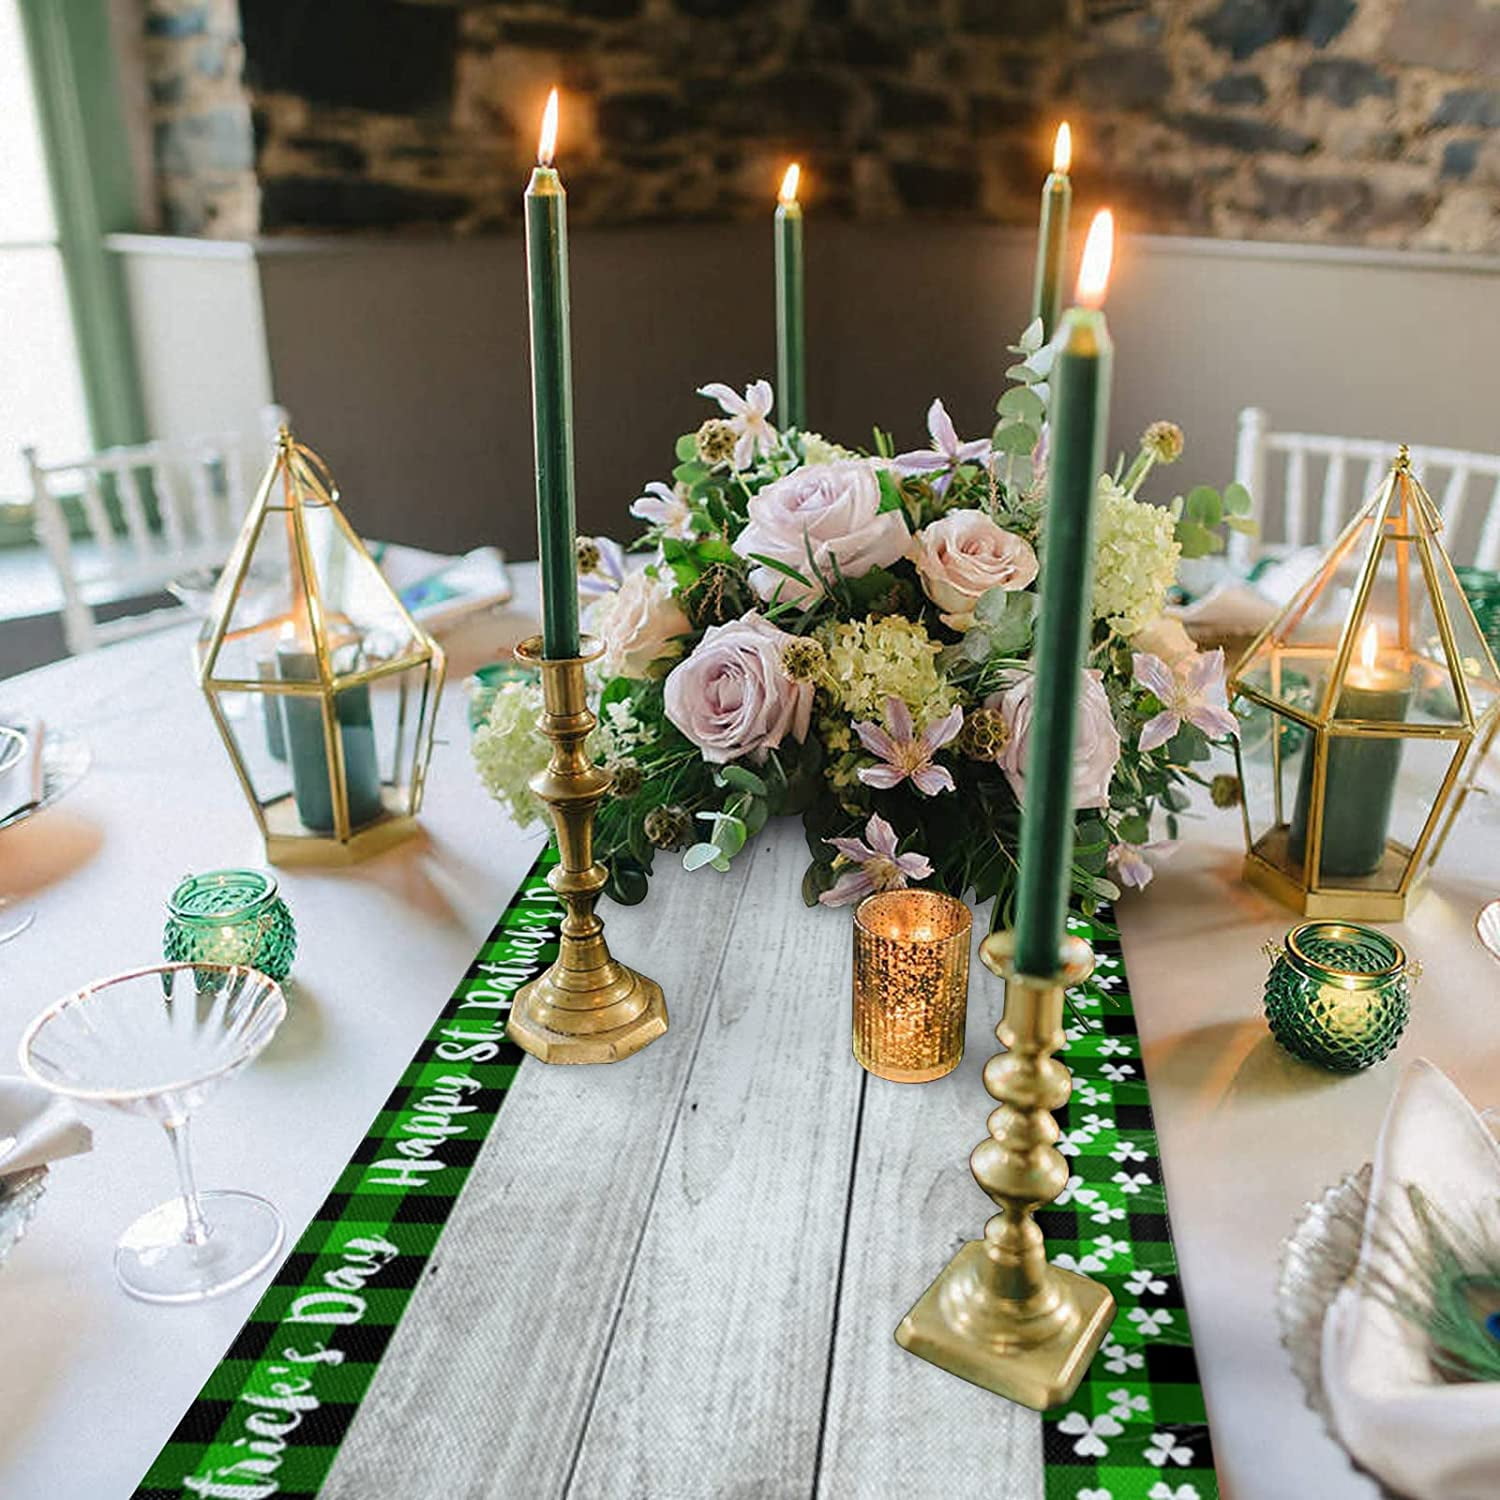 Green Farm Truck Shamrock Tablecloth for Farmhouse Wood Board Table Kitchen Dining Wedding Picnic Party Irish Festival Patricks Day Table Runner Dresser Scarves for Holiday Dining Party Shan-S St 